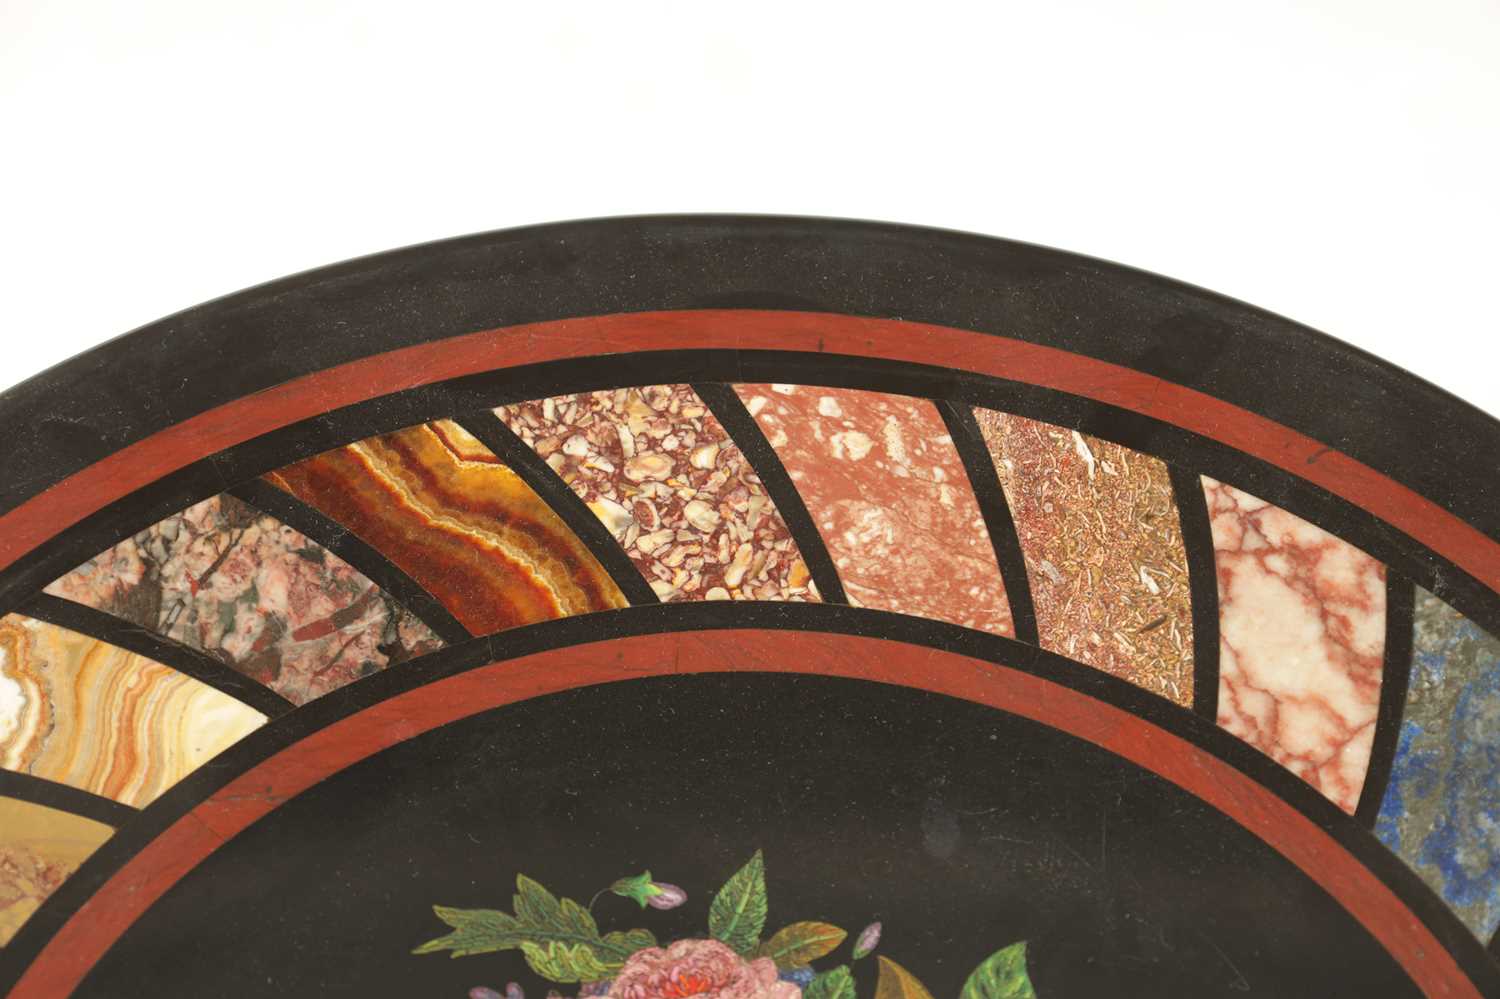 A FINE AND RARE 19TH CENTURY ITALIAN MICRO MOSAIC AND SPECIMEN MARBLE CIRCULAR TOPPED TABLE - Image 5 of 7